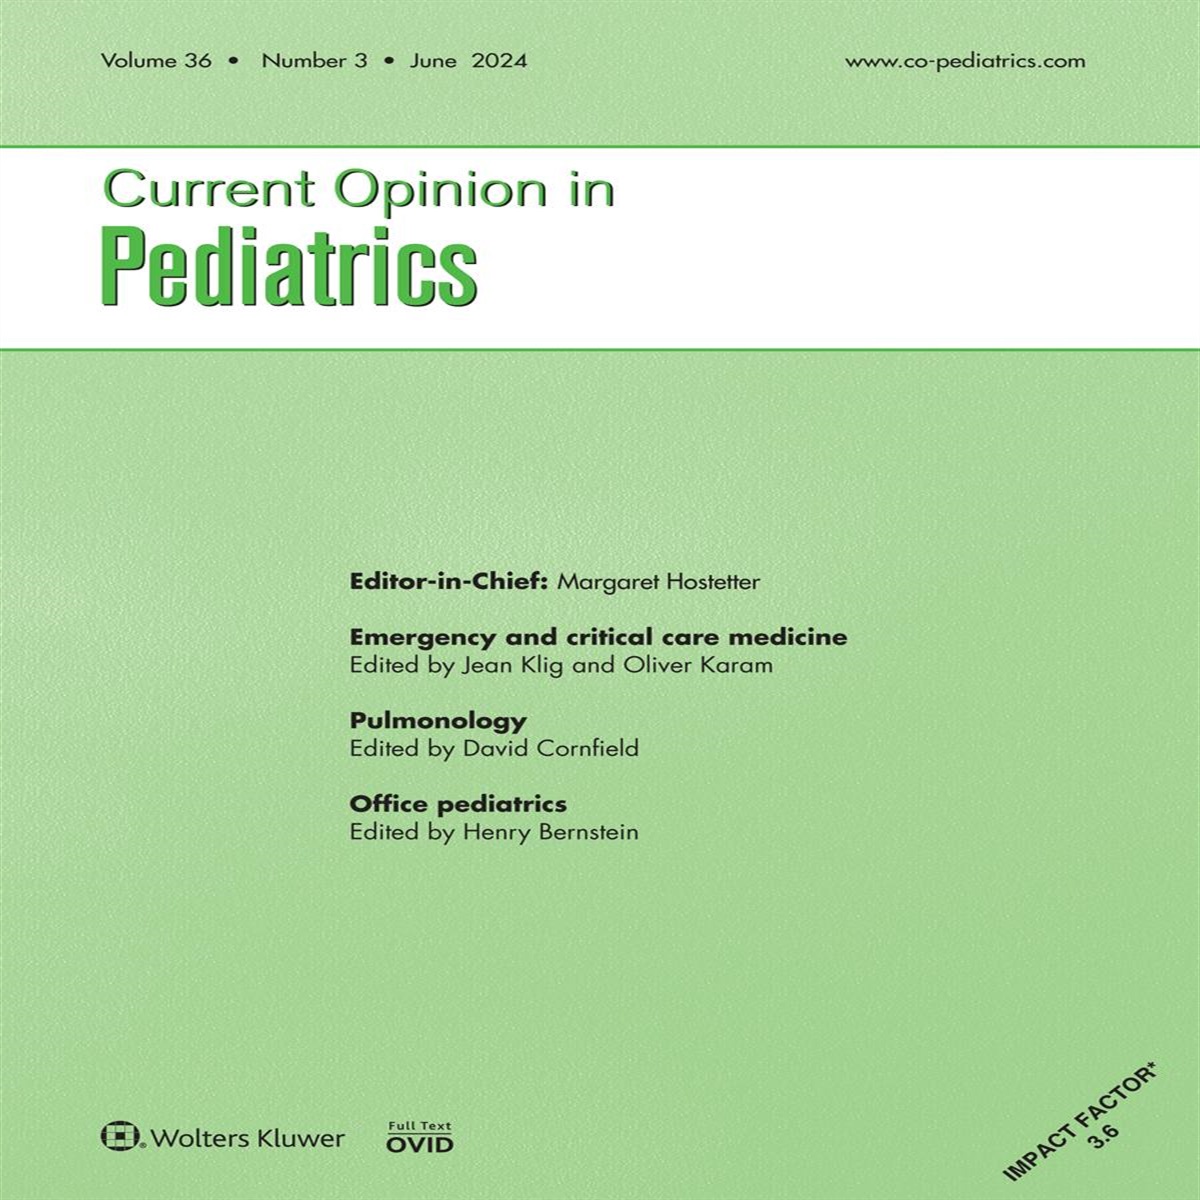 Pediatric pulmonology: progress at the intersection of medicine and discovery